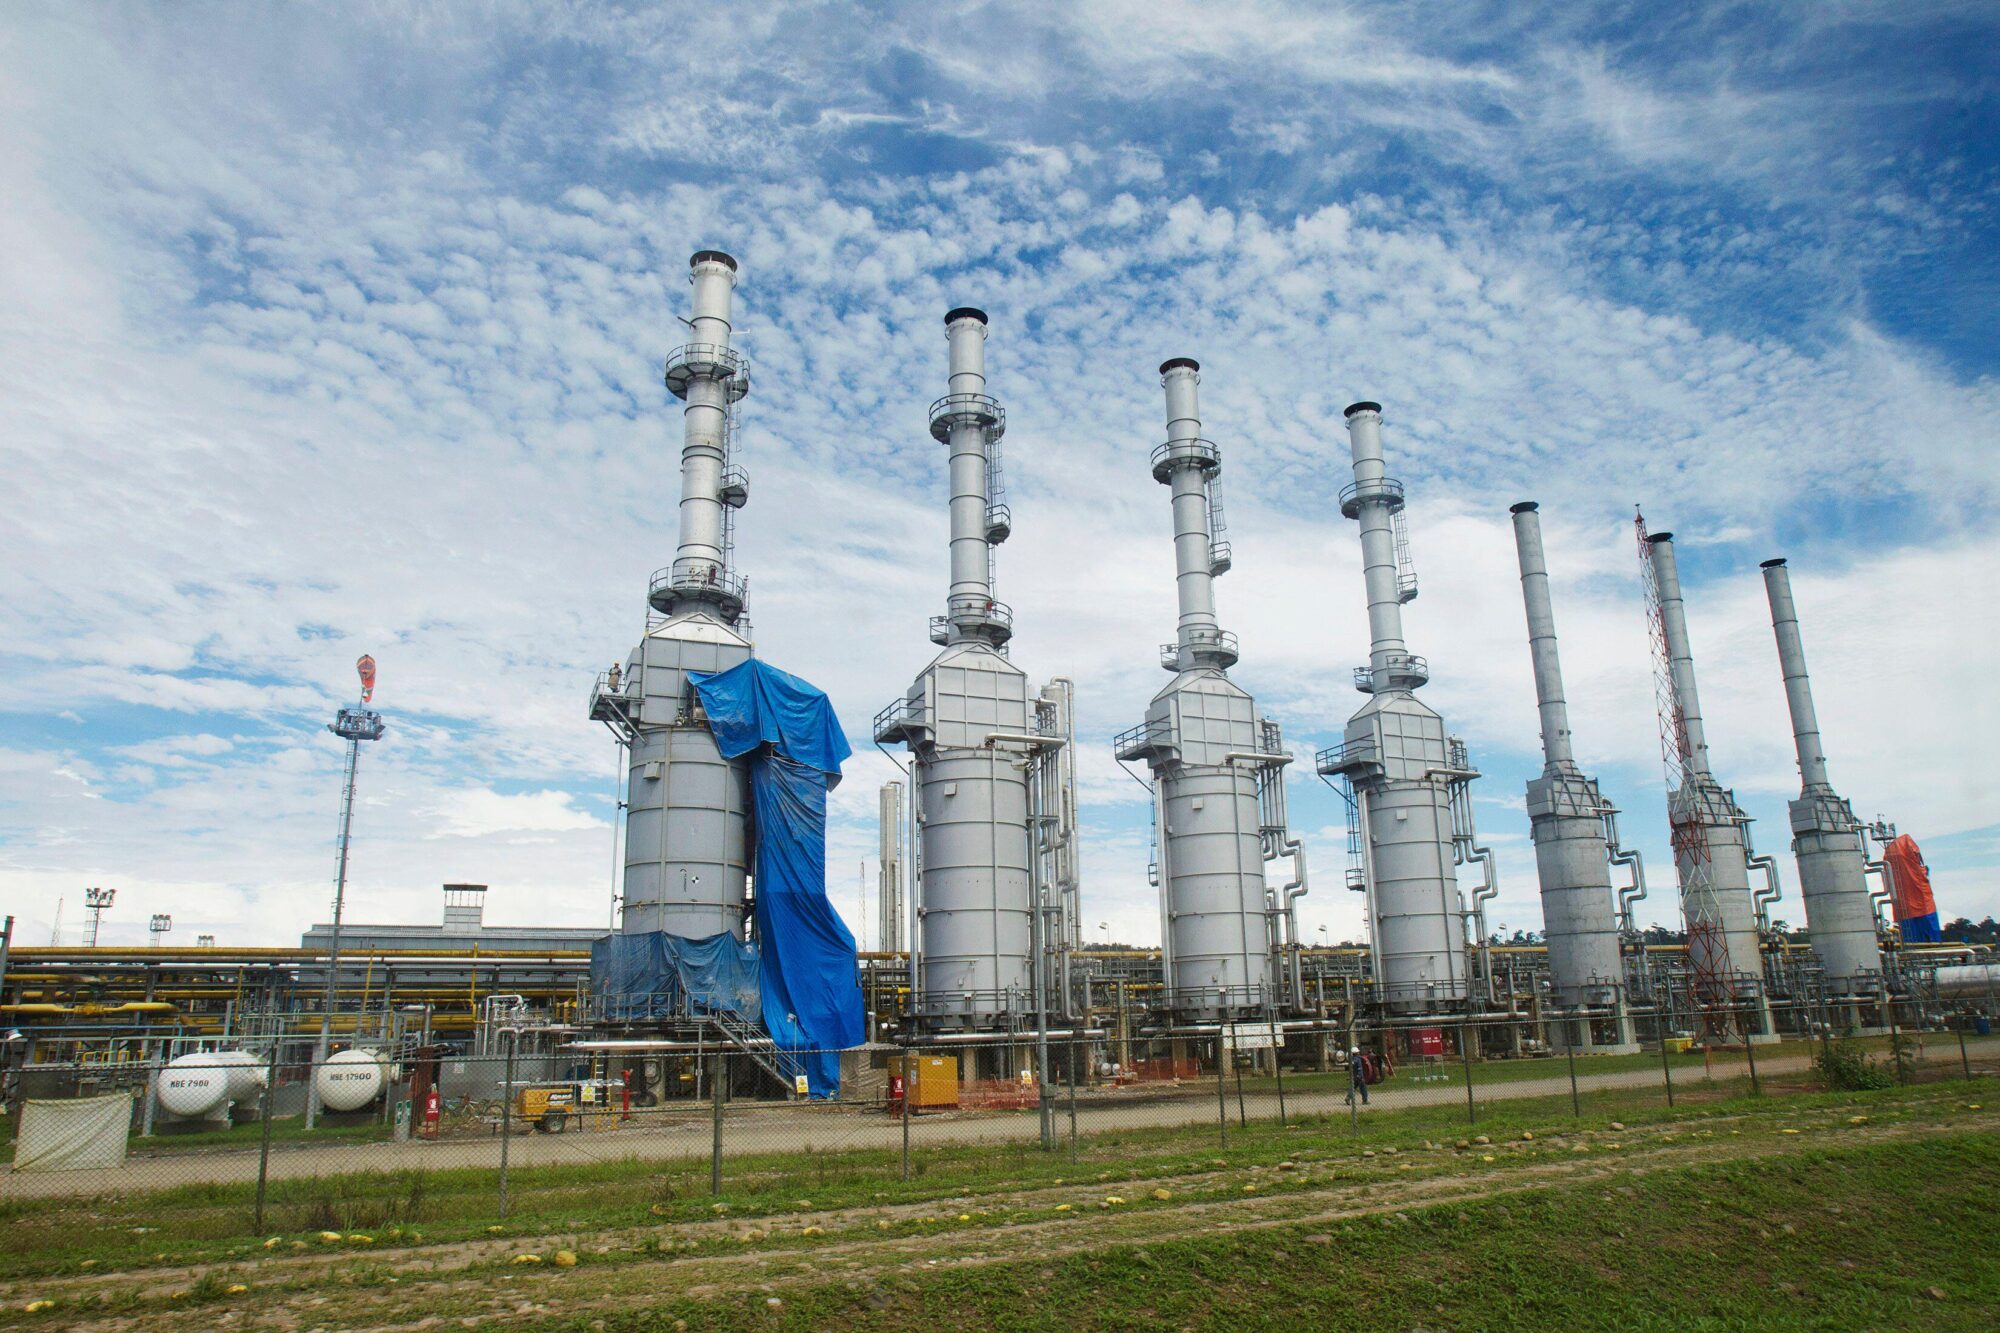 <p>Las Malvinas natural gas plant at the Camisea project in Peru&#8217;s Cusco region. The country is one of several in Latin America backing the development of natural gas production, though its use as a &#8216;bridge fuel&#8217; in energy transition is a topic of contentious debate. (Image: Enrique Castro-Mendivil / Alamy)</p>